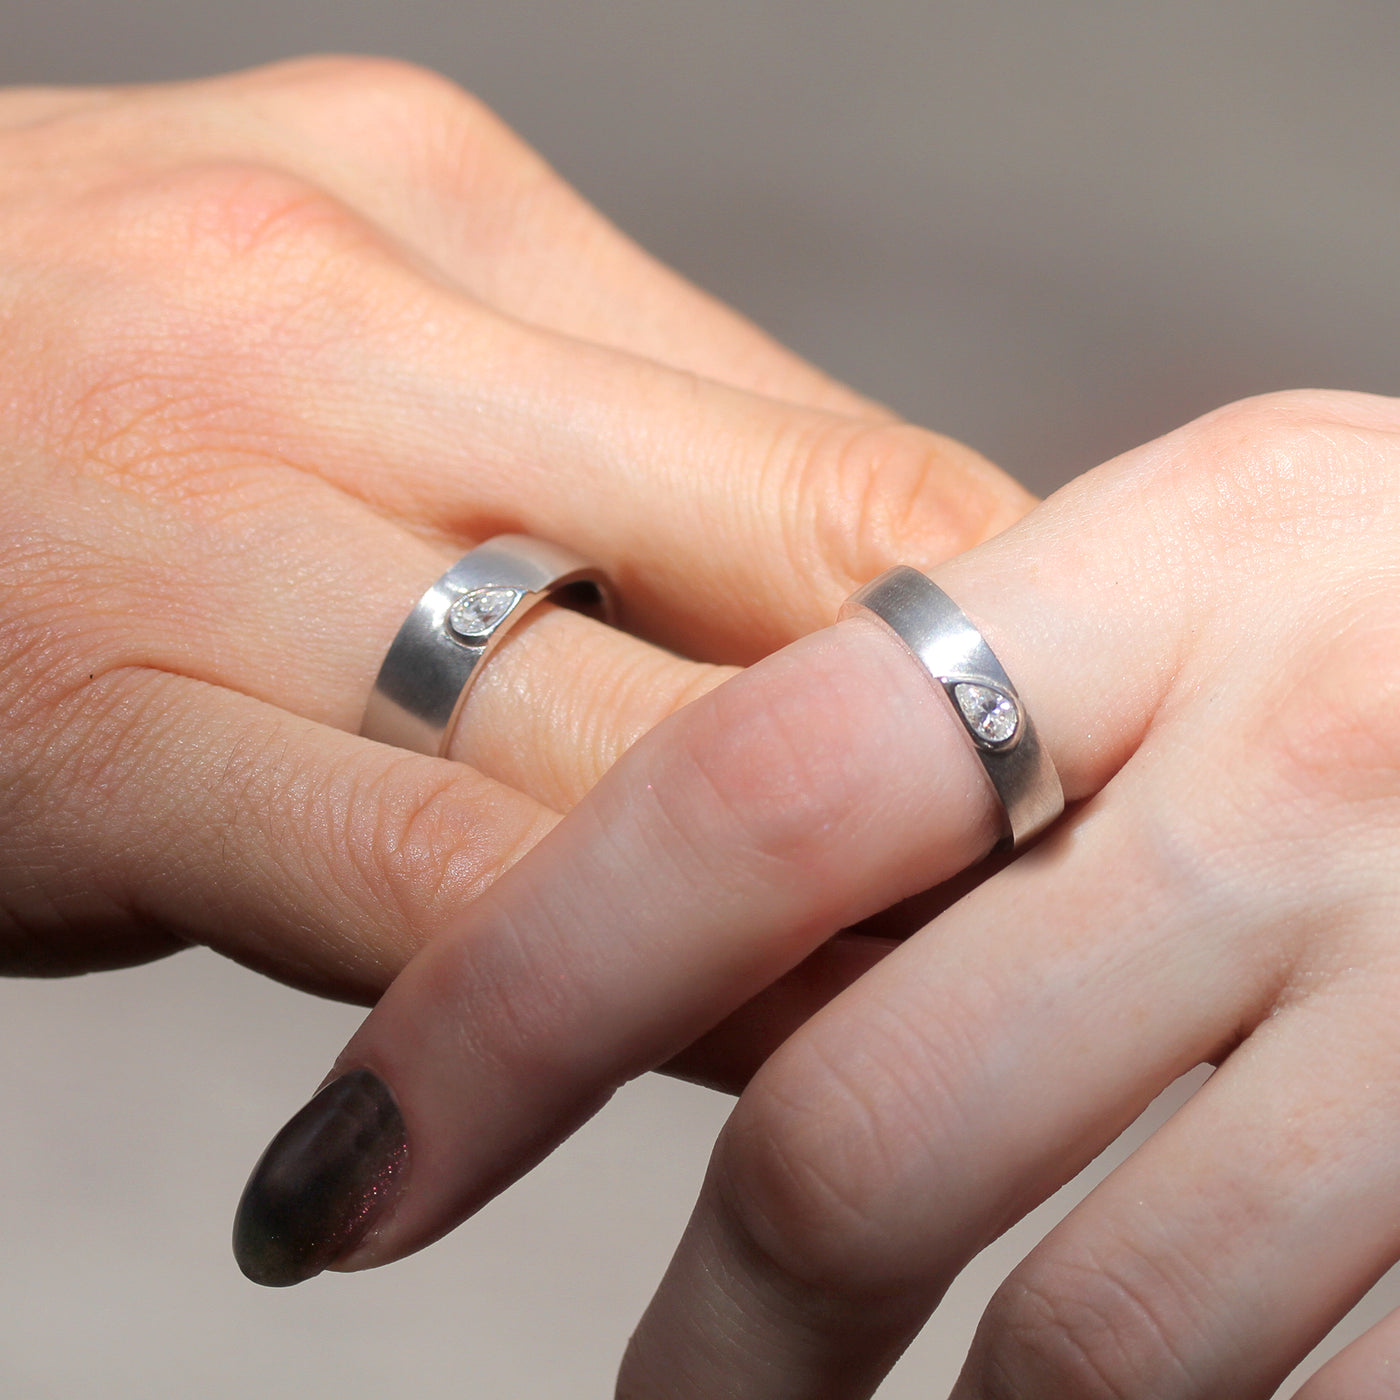 Unbreakable Bond: His & Hers Ring Set